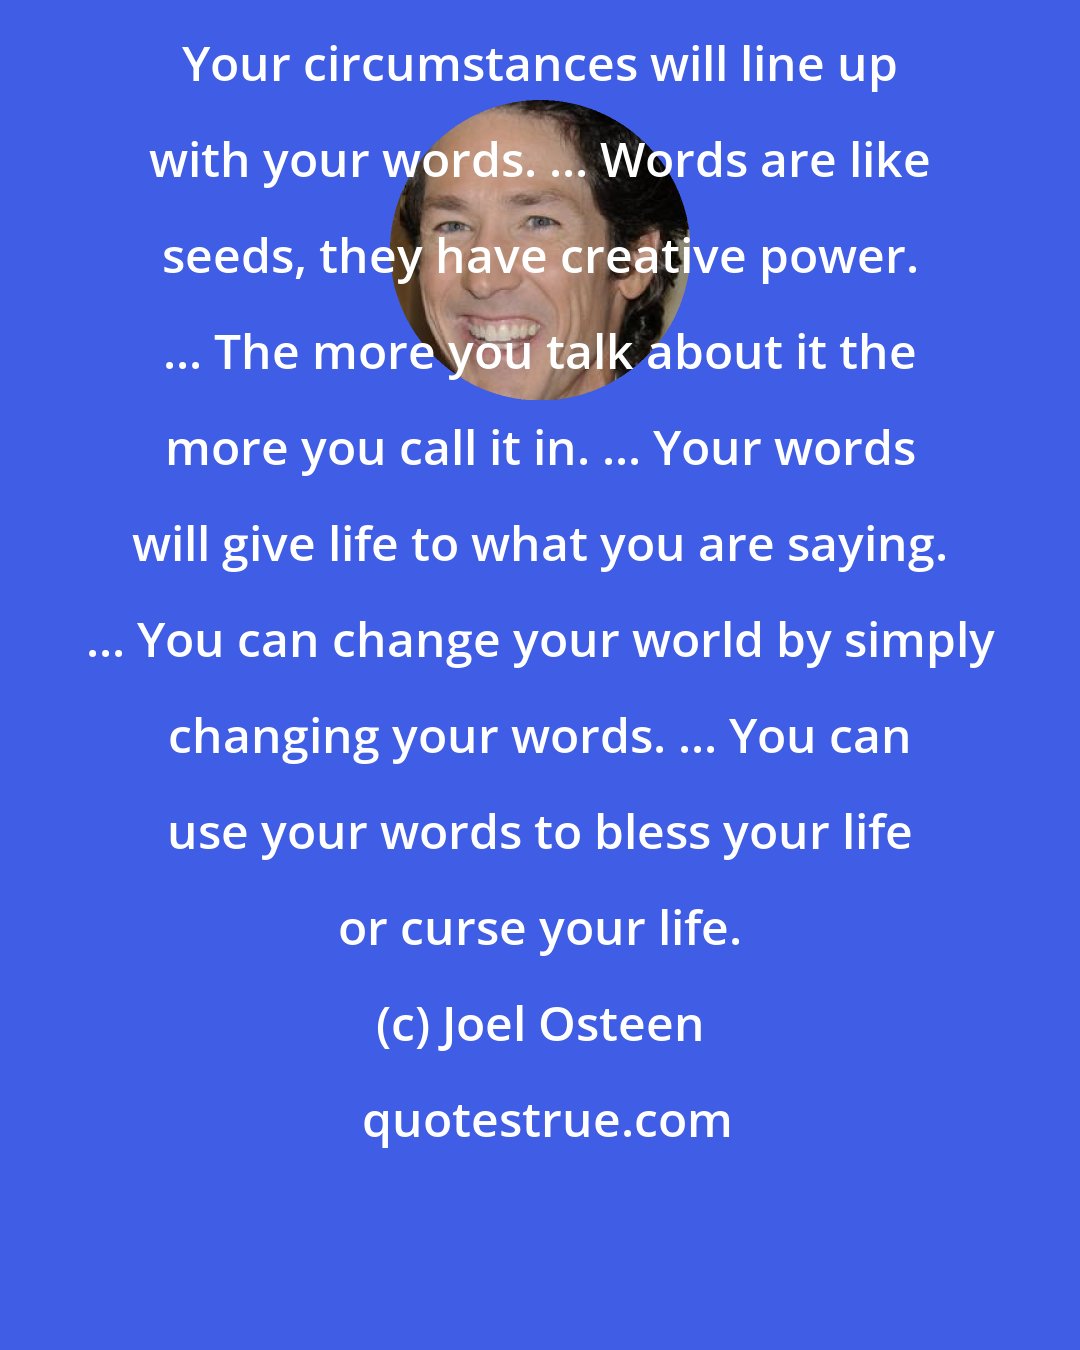 Joel Osteen: Your circumstances will line up with your words. ... Words are like seeds, they have creative power. ... The more you talk about it the more you call it in. ... Your words will give life to what you are saying. ... You can change your world by simply changing your words. ... You can use your words to bless your life or curse your life.